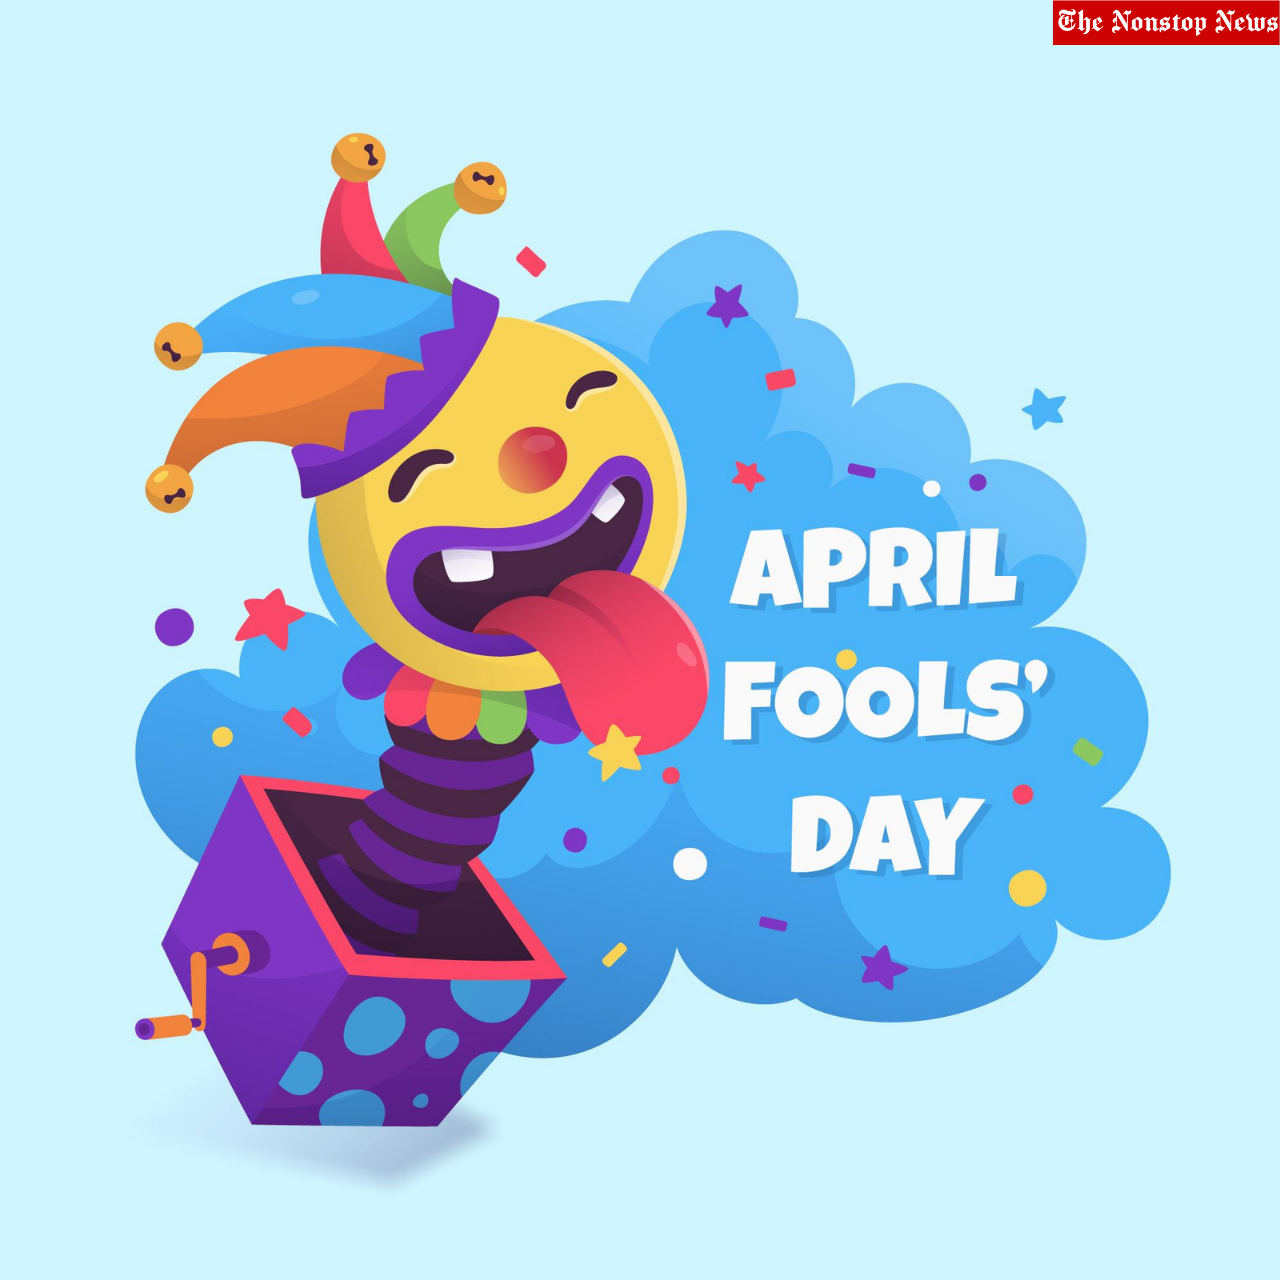 April Fools' Day 2022: Best Instagram Captions, Facebook Jokes, Twitter Wishes, Pinterest Images, and Reddit Quotes to Share